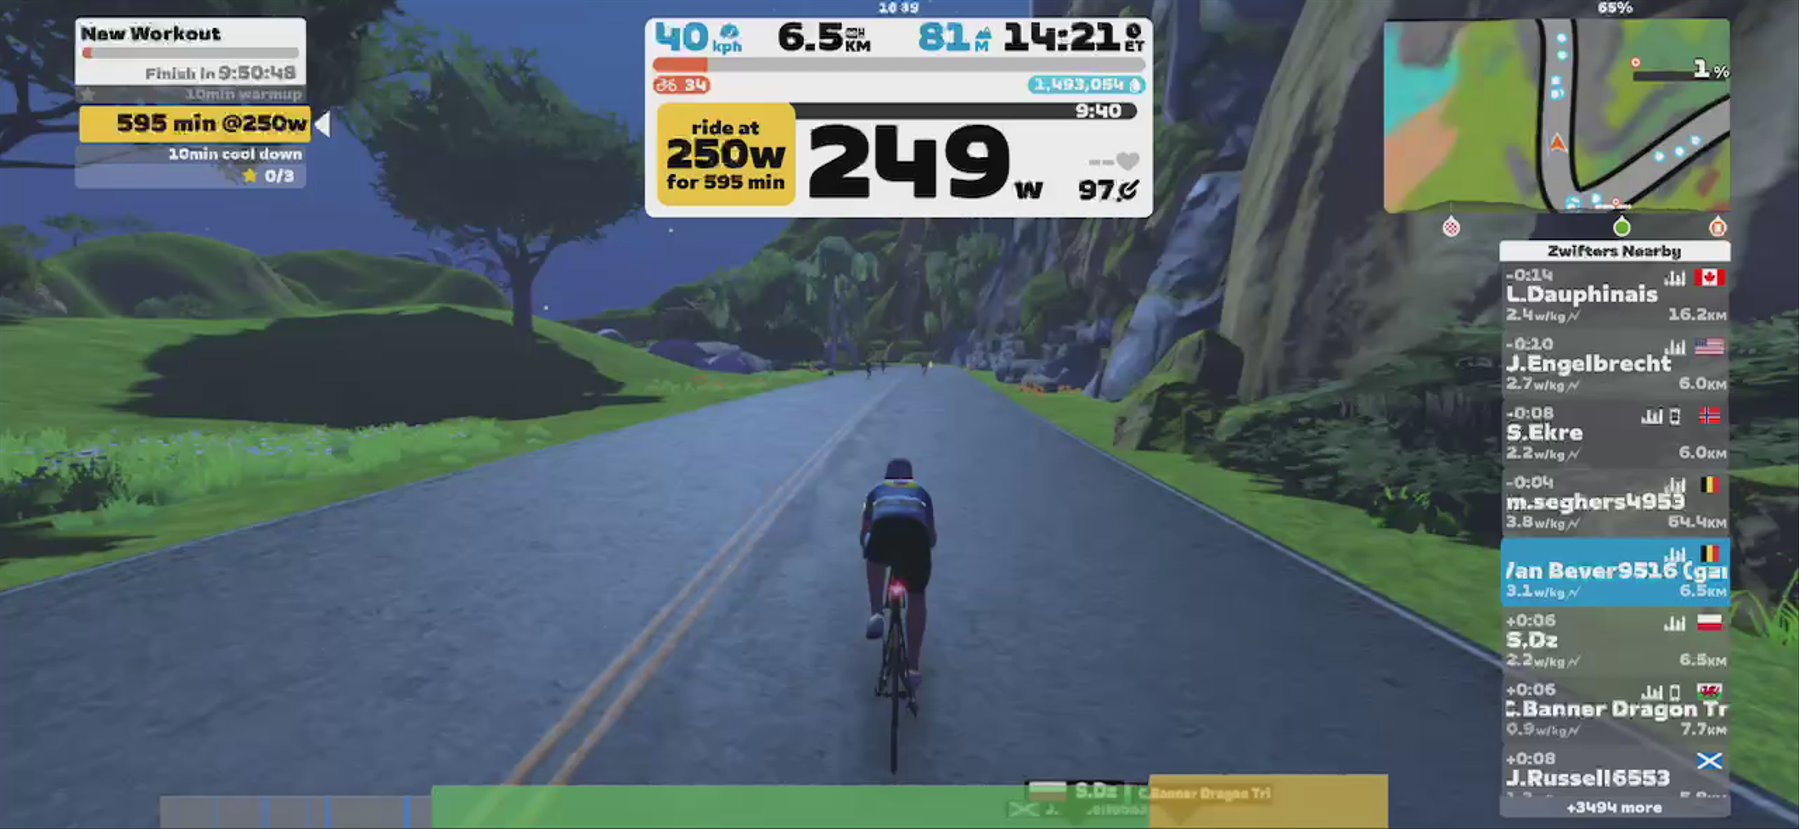 Zwift - New Workout in Watopia